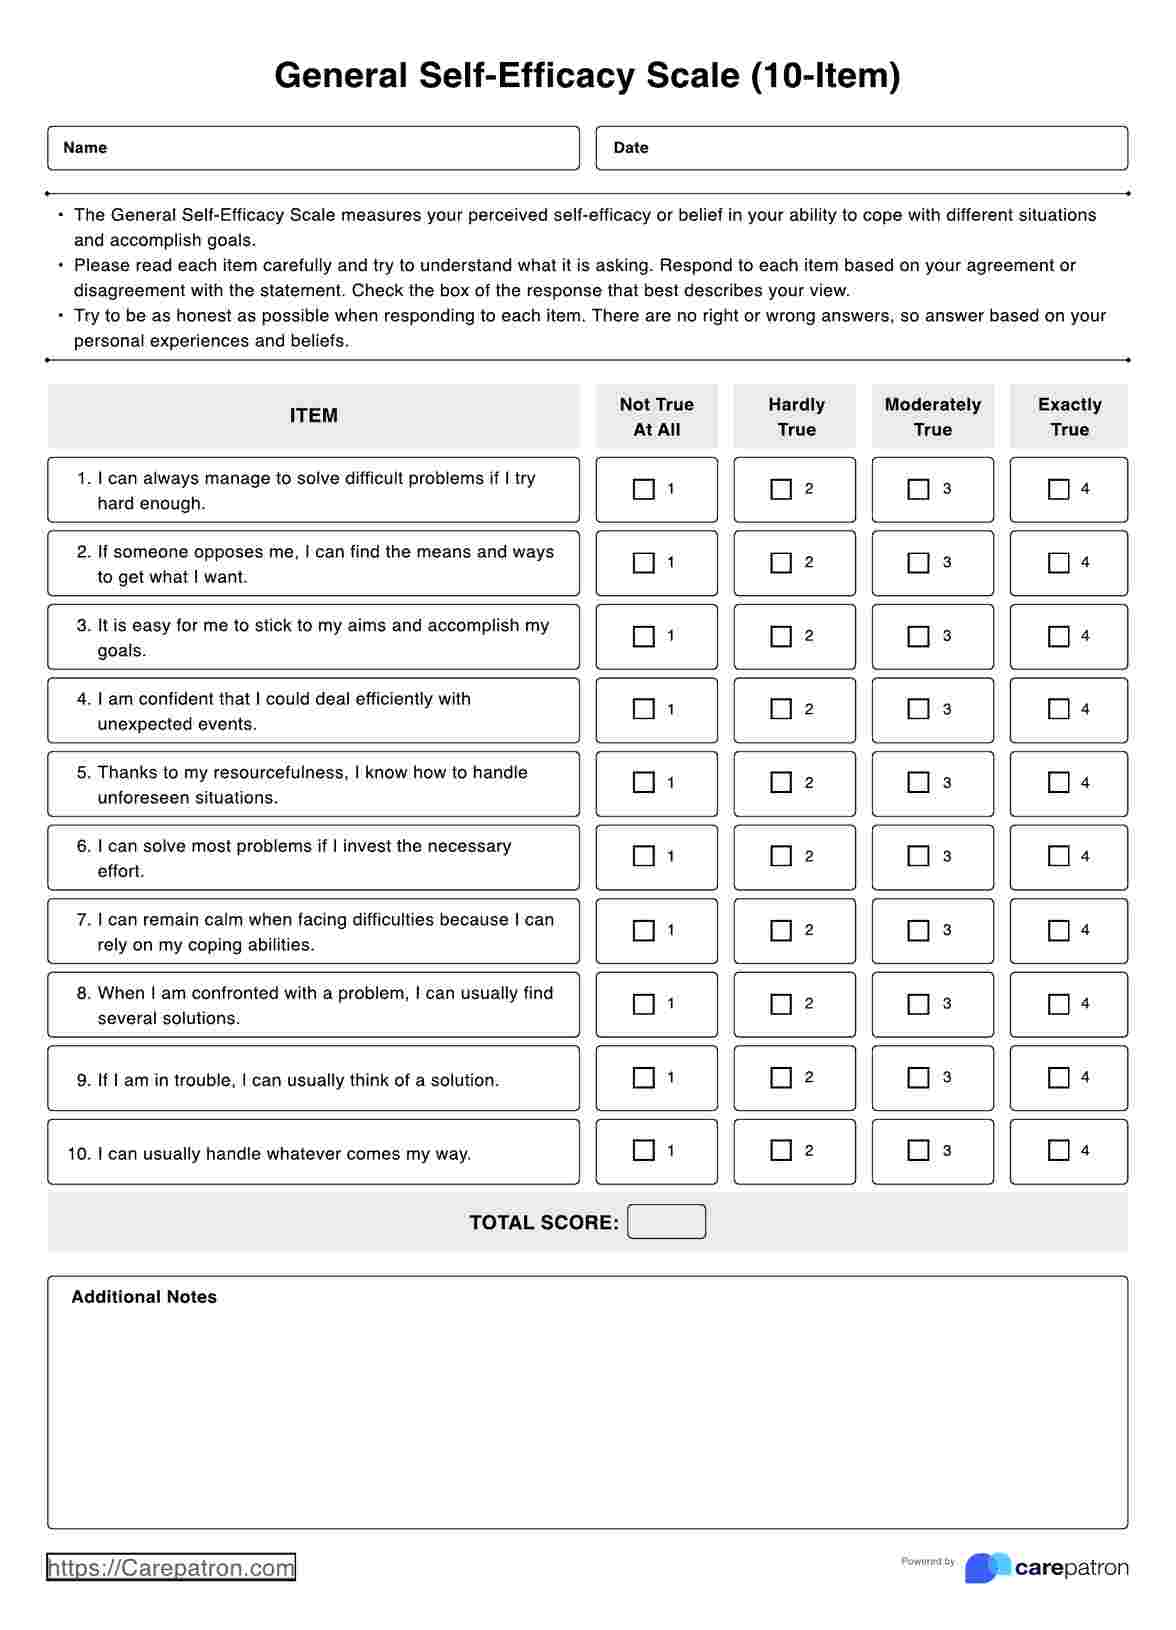 General Self-Efficacy Scale (GSE) PDF Example